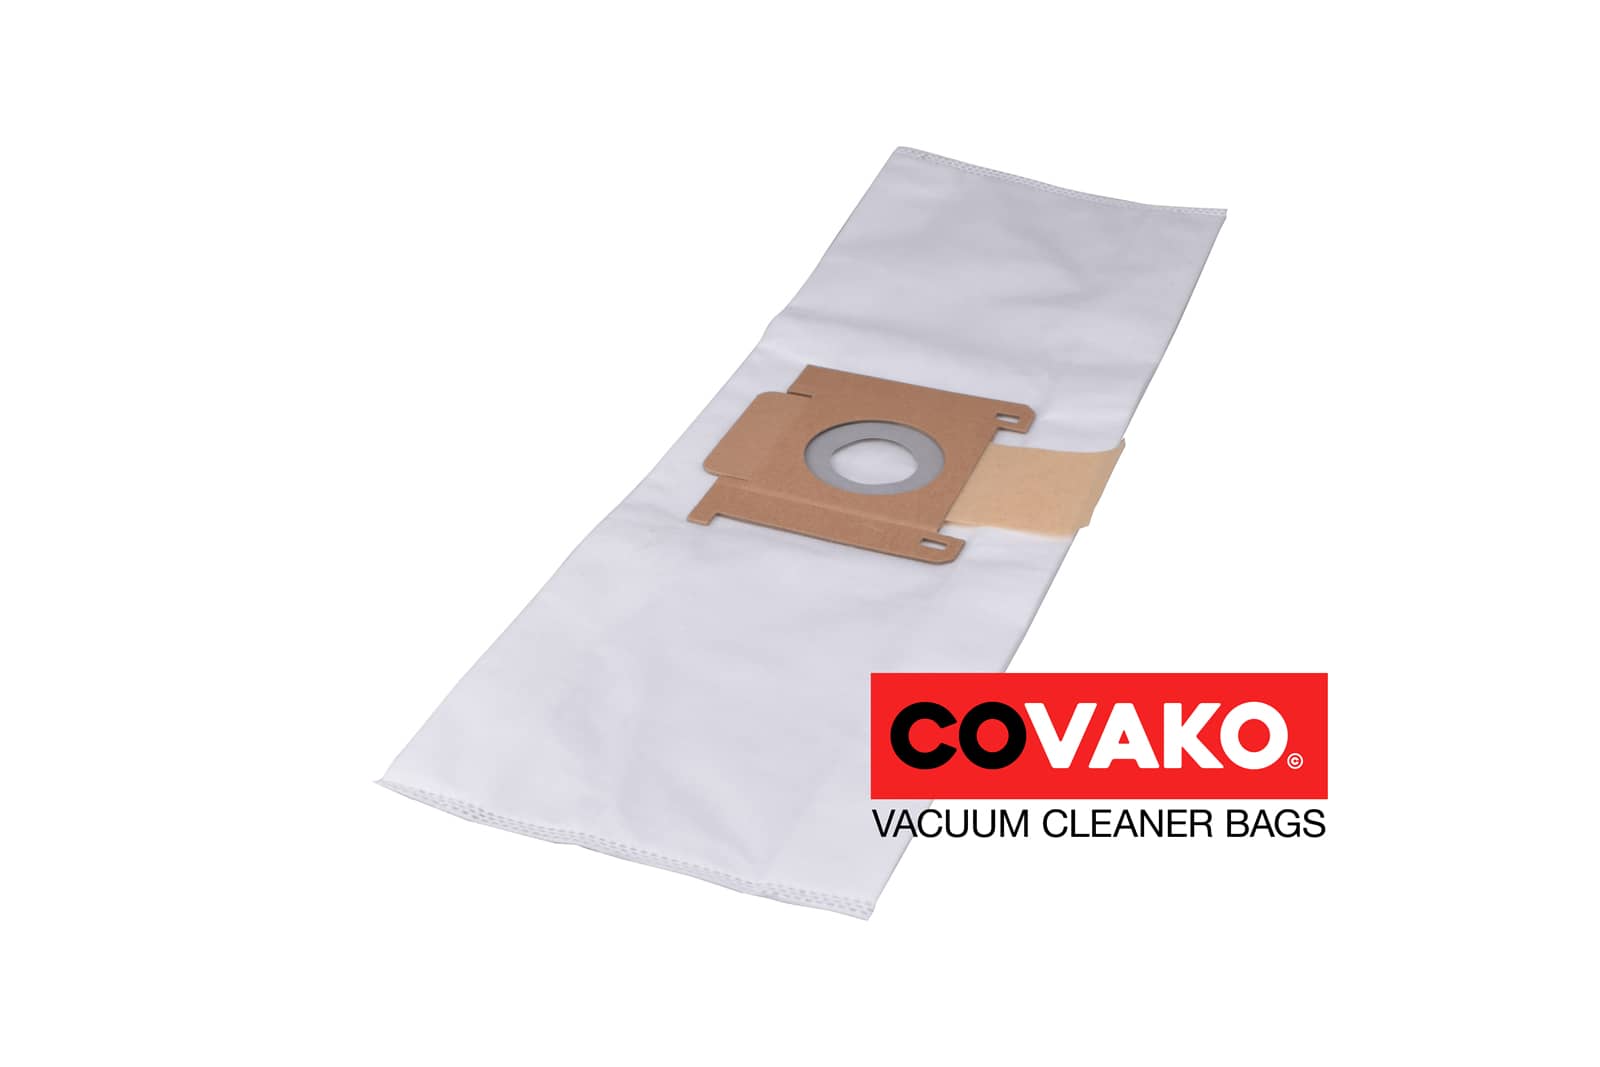 Comac i-vac 5B / Synthesis - Comac vacuum cleaner bags